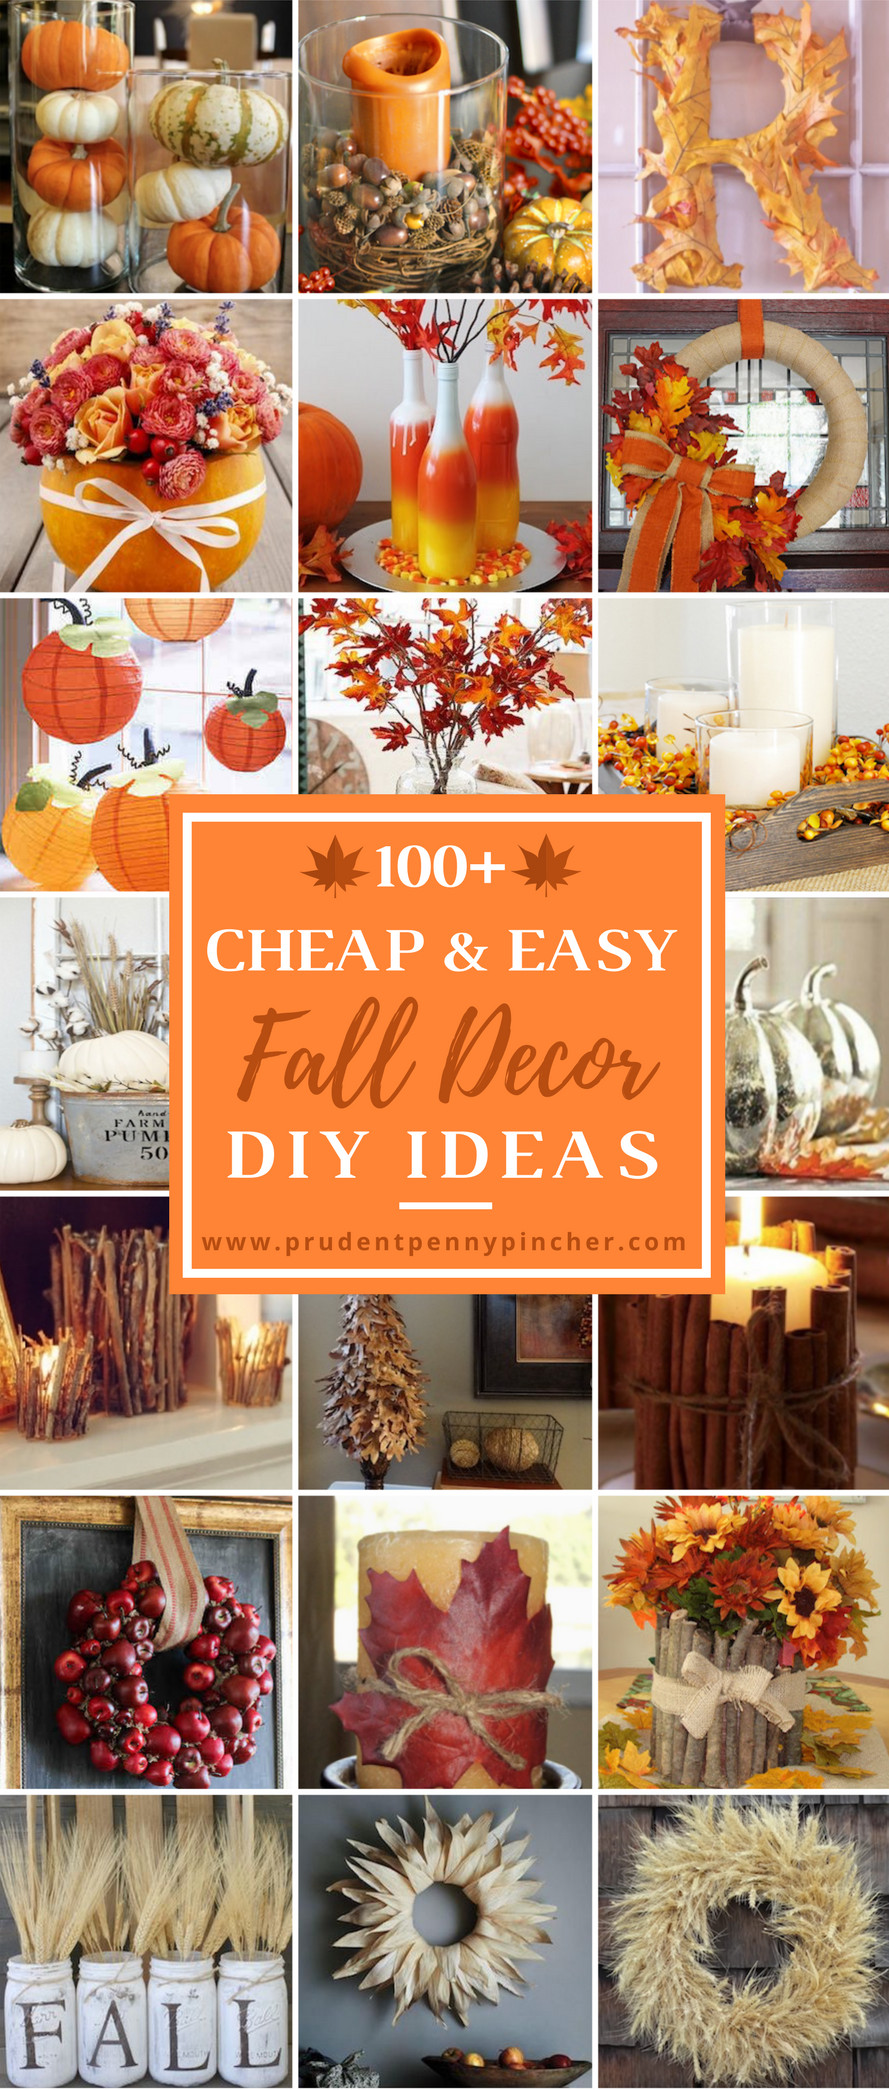 DIY Fall Decorations
 100 Cheap and Easy Fall Decor DIY Ideas Prudent Penny